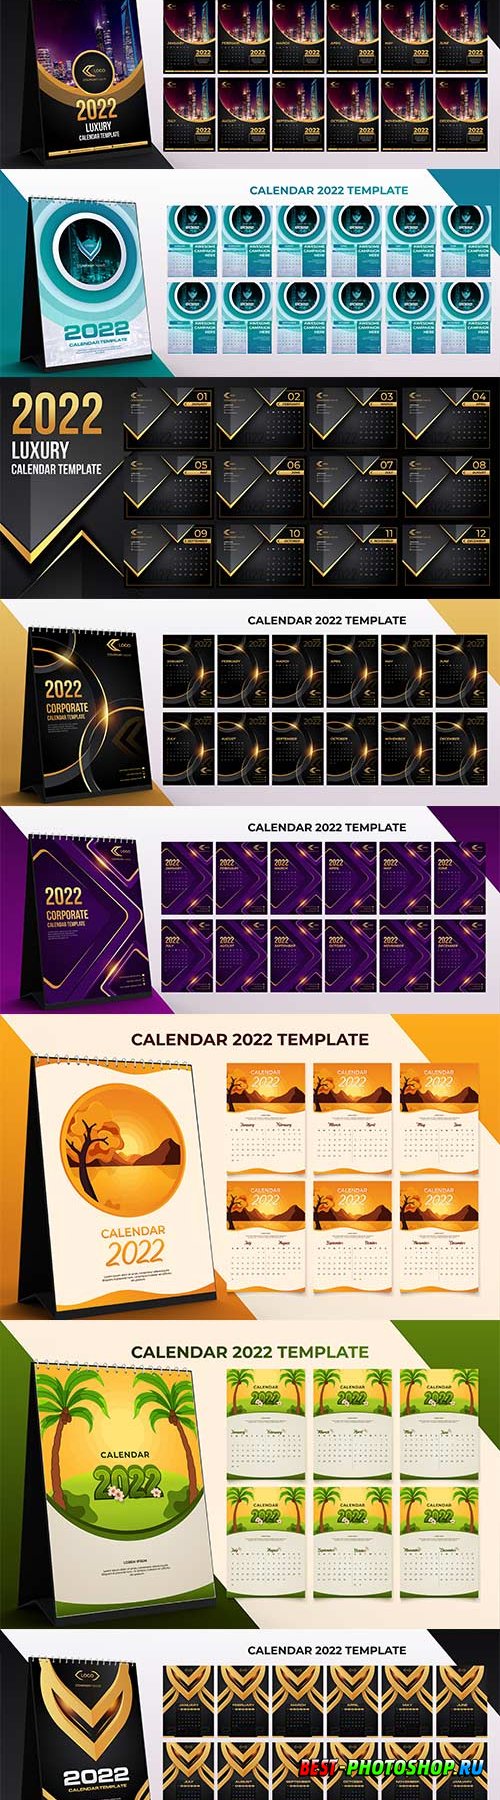 2022 desk calendar corporate template set of 12 months with black gold color background premium vector